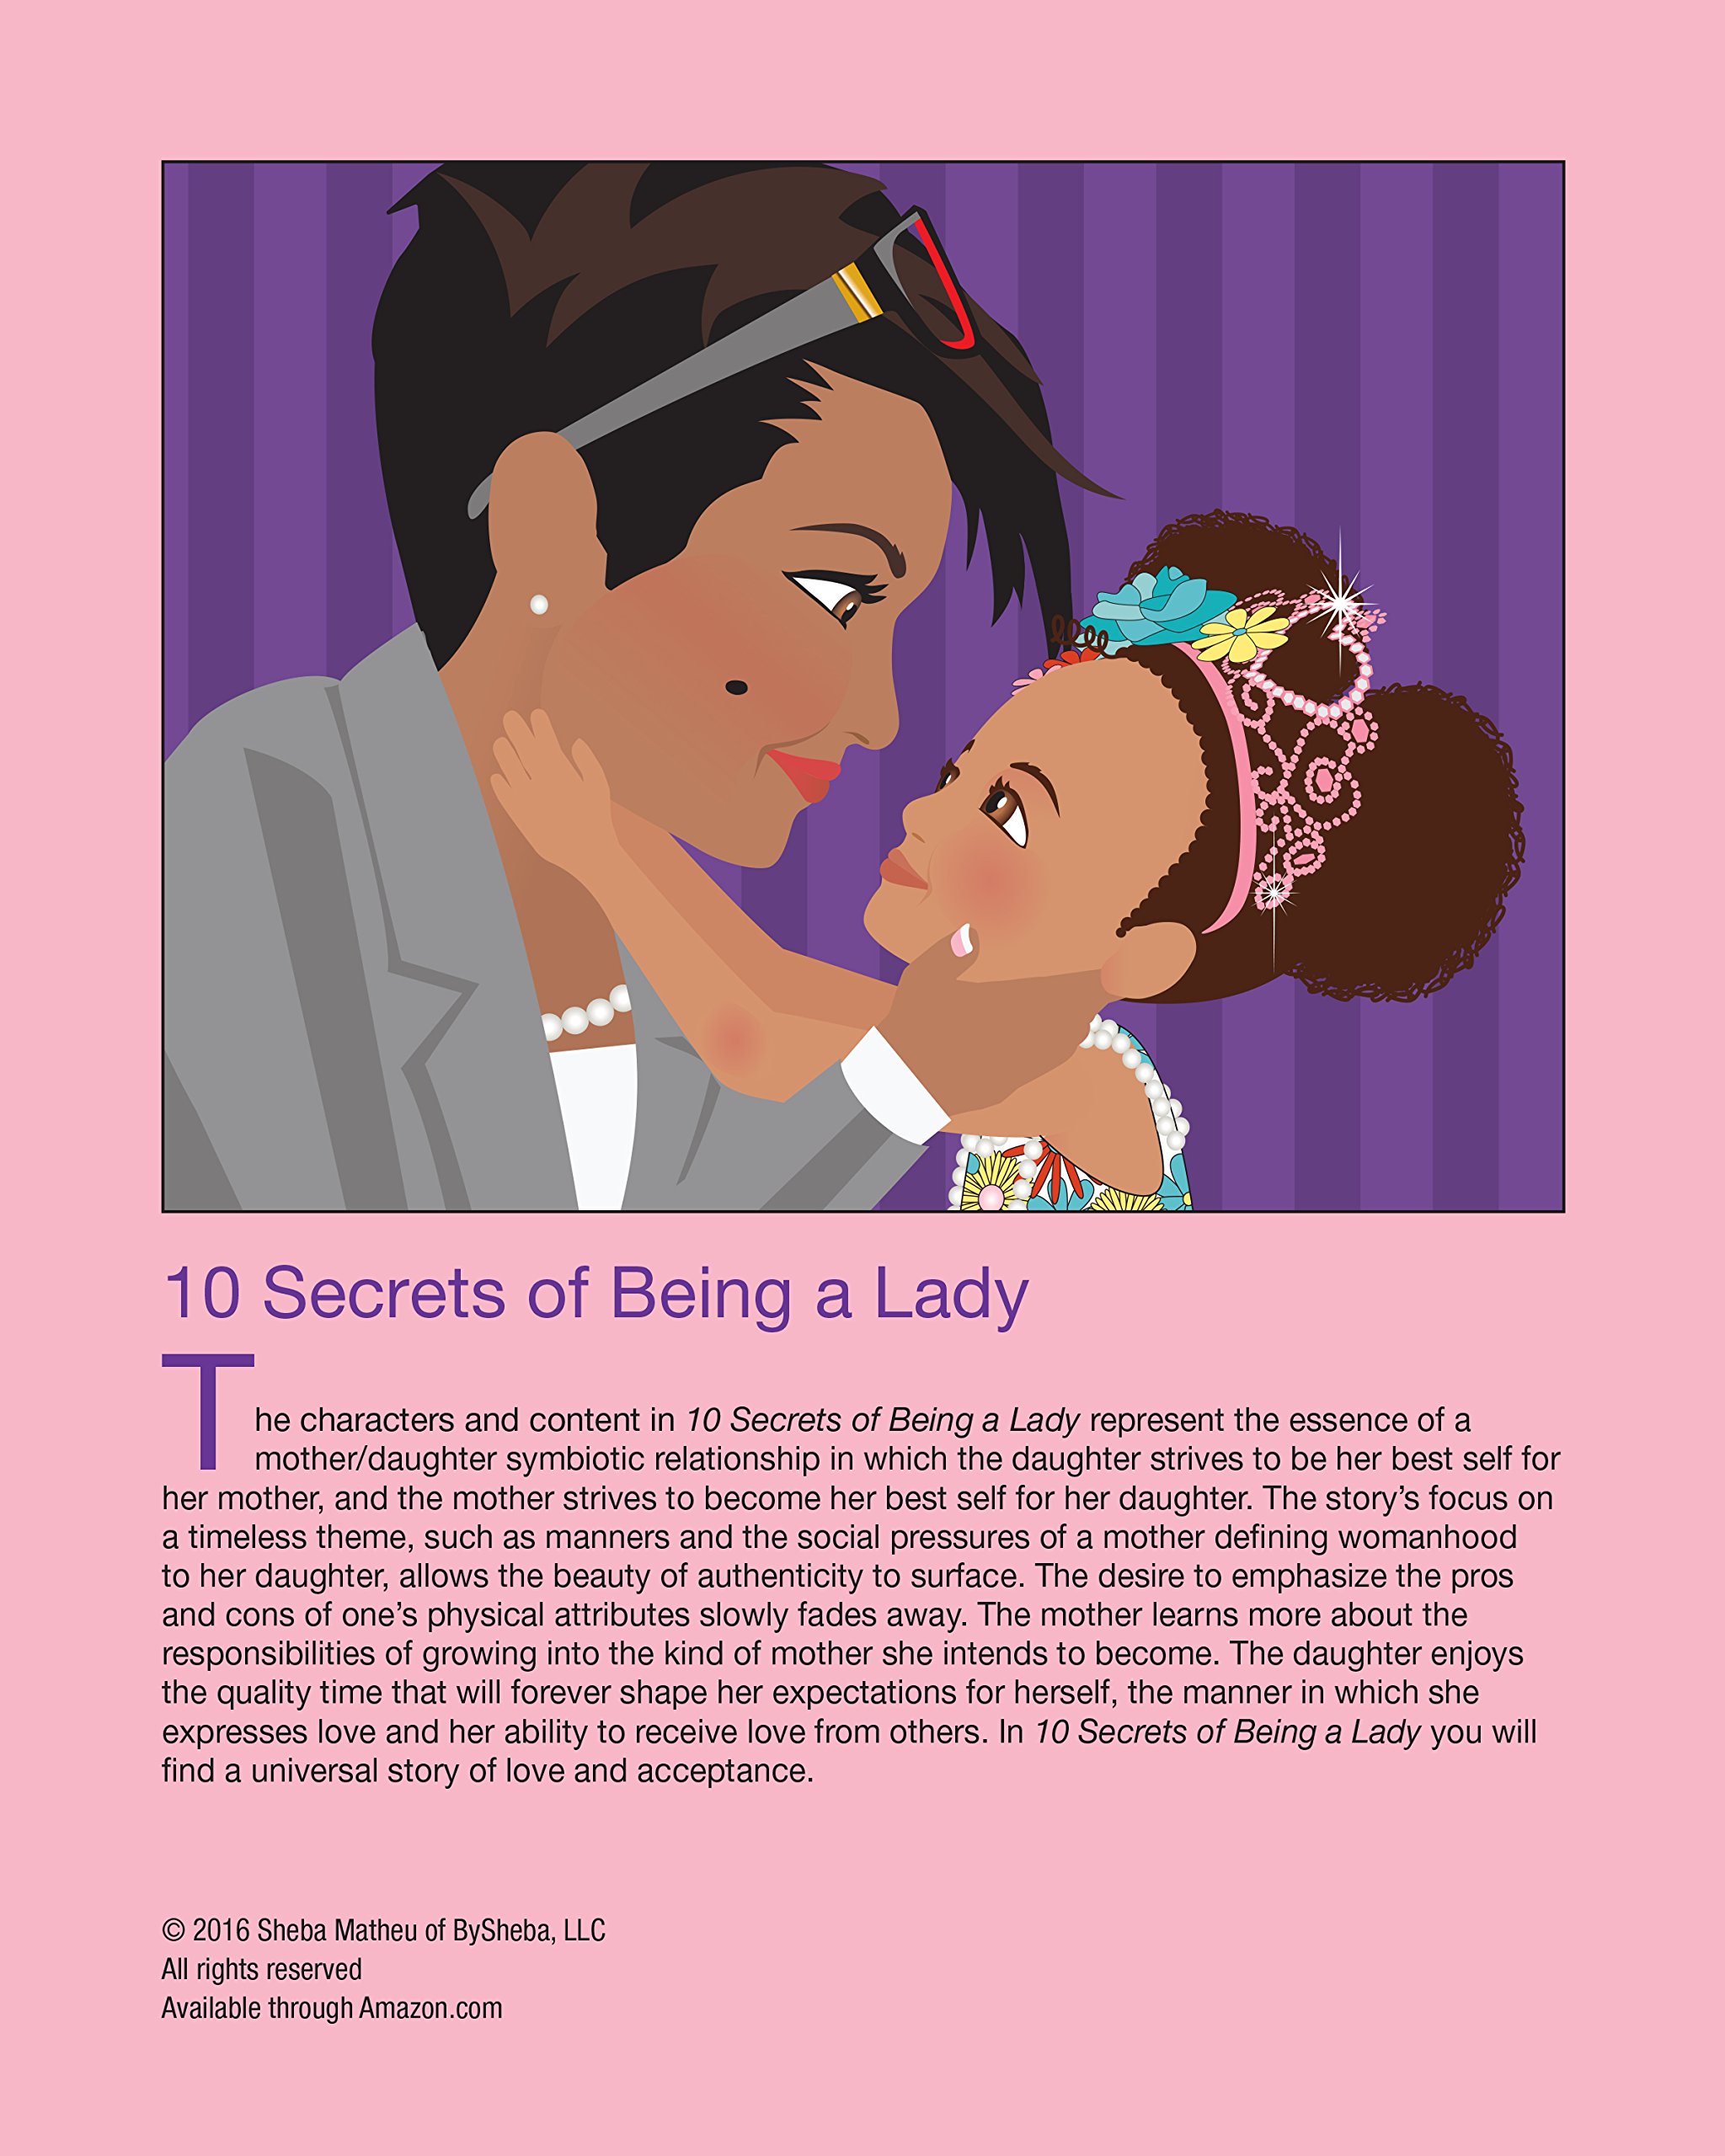 10 secrets of being a lady